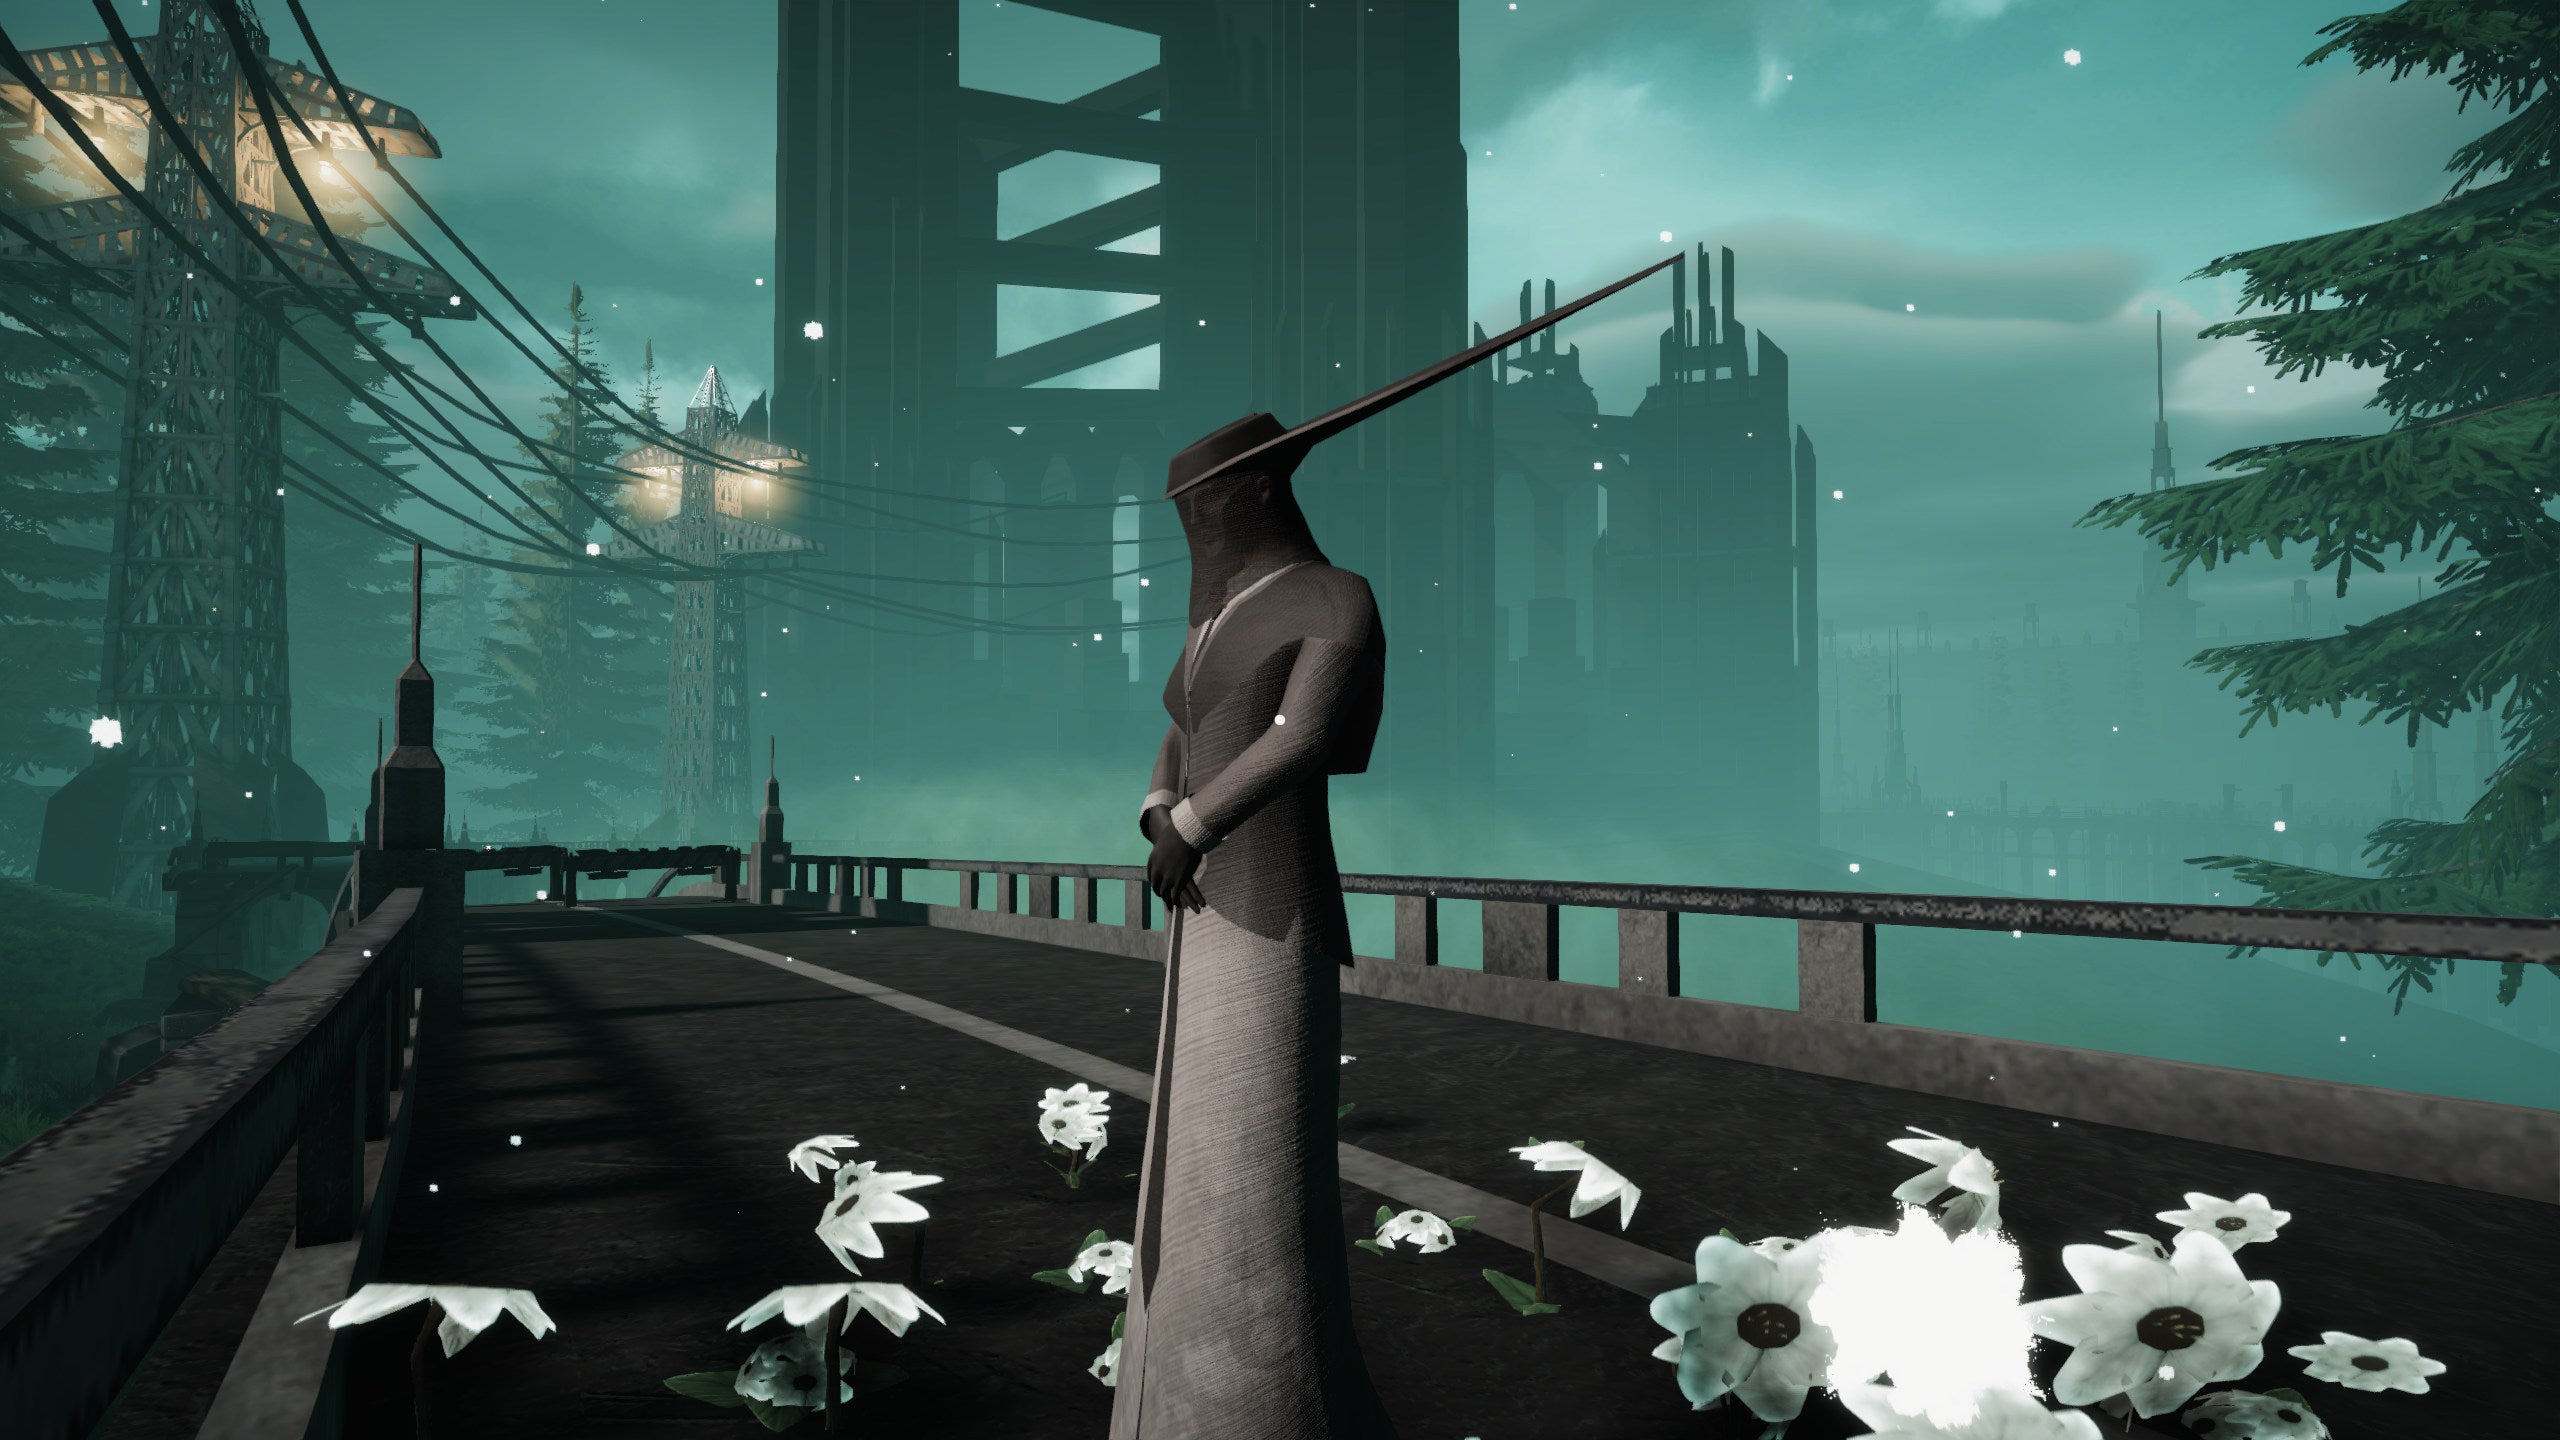 Giant spooky Gothic architecture in the fog in a The Silent Swan screenshot.